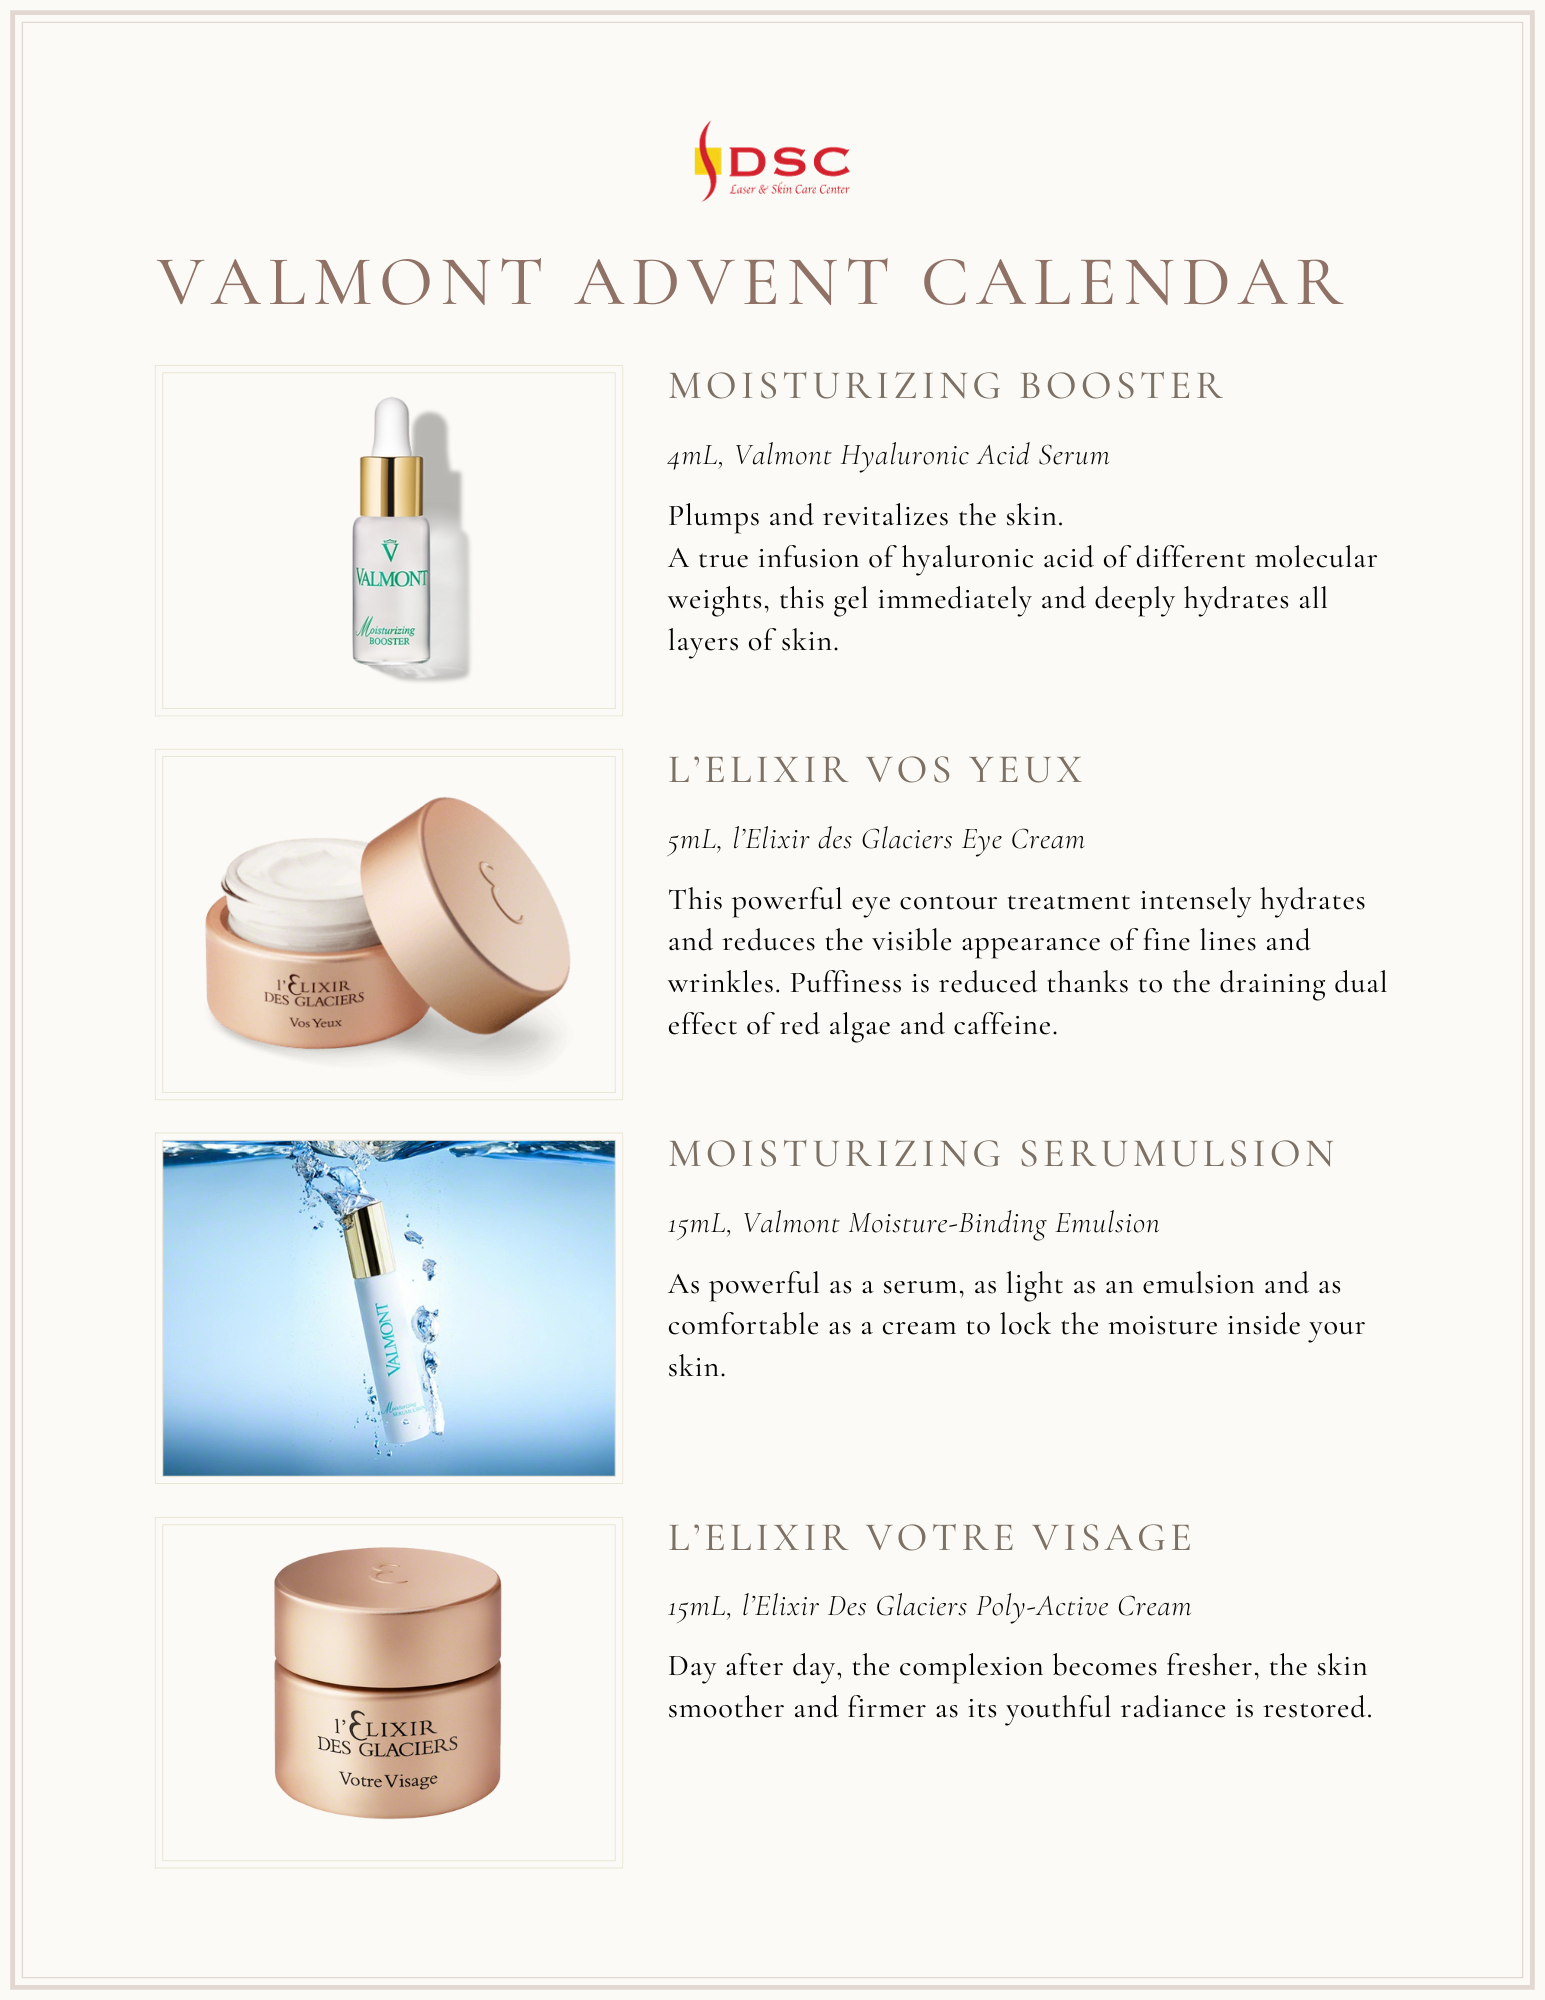 DSC Valmont 2023 Advent Calendar contents, page 2 of 3 with ninth to twelfth items included from top to bottom: Valmont Moisturizing Booster hyaluronic acid serum, L'Elixir des Glaciers Vos Yeux premium eye cream, Valmont Moisturizing Serumulsion, and L'Elixir des Glaciers Votre Visage premium face cream